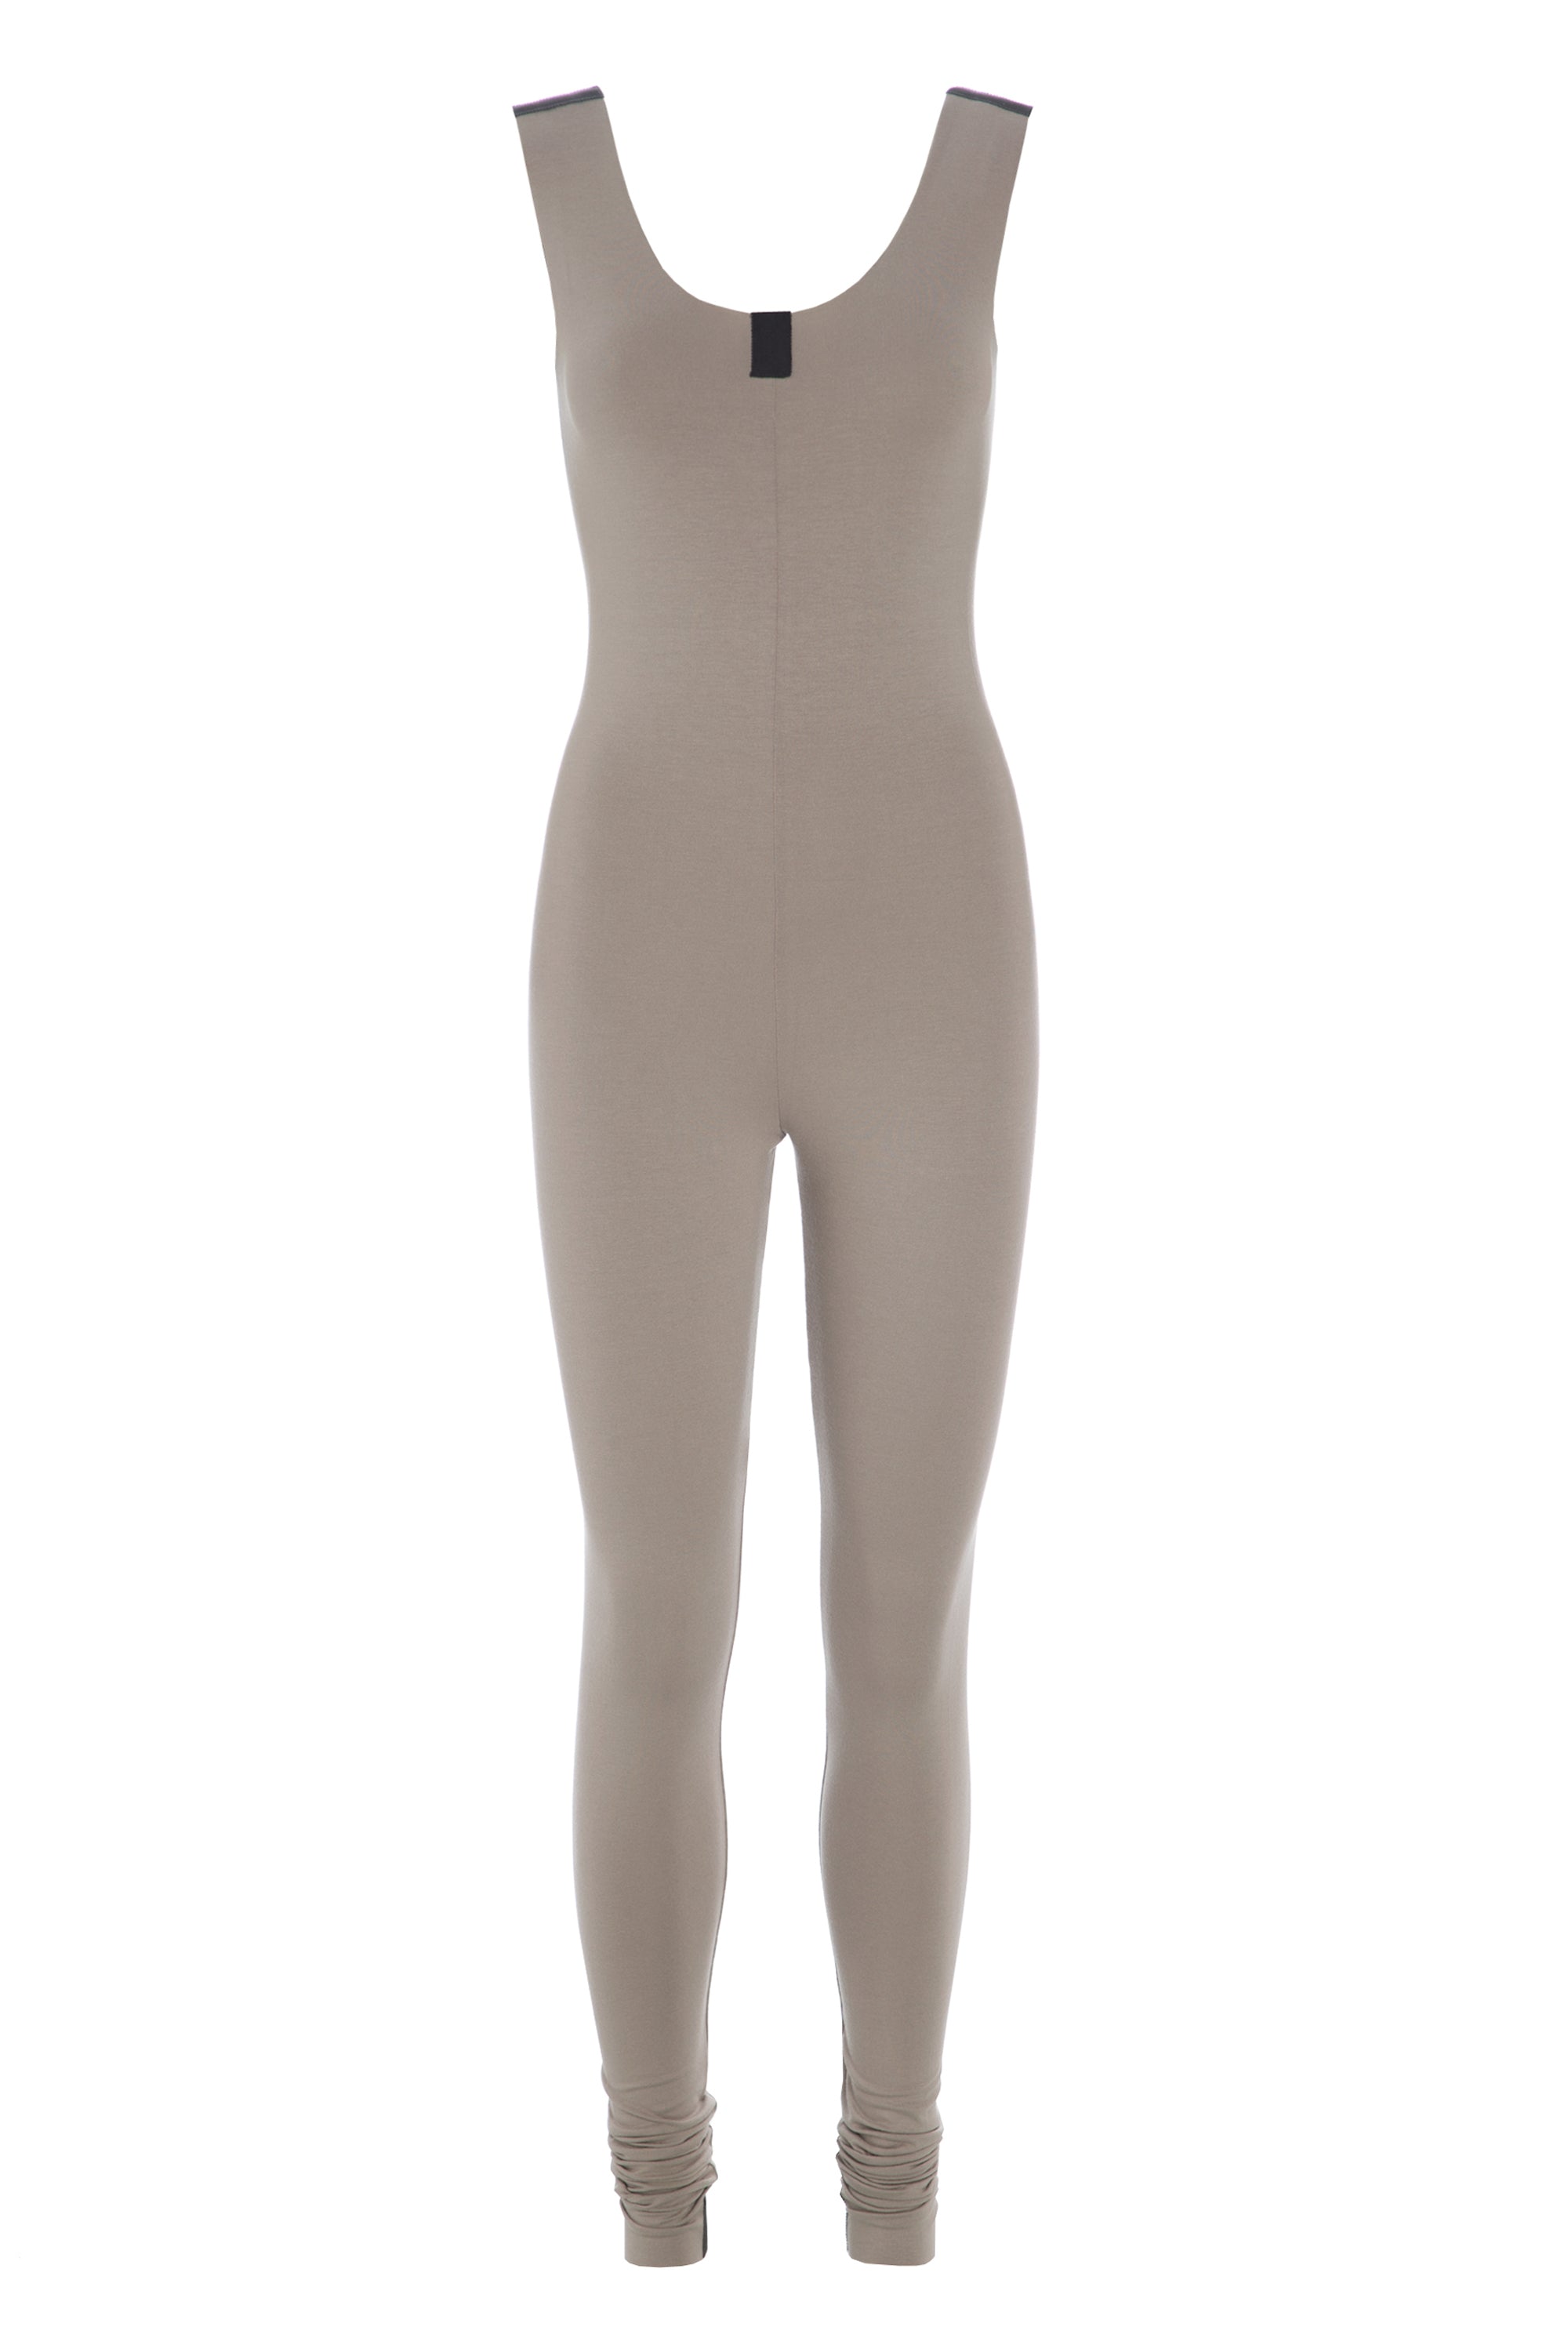 Elevate Your Yoga Experience with Nylon-Spandex Blend Yoga Jumpsuits, digitProMag